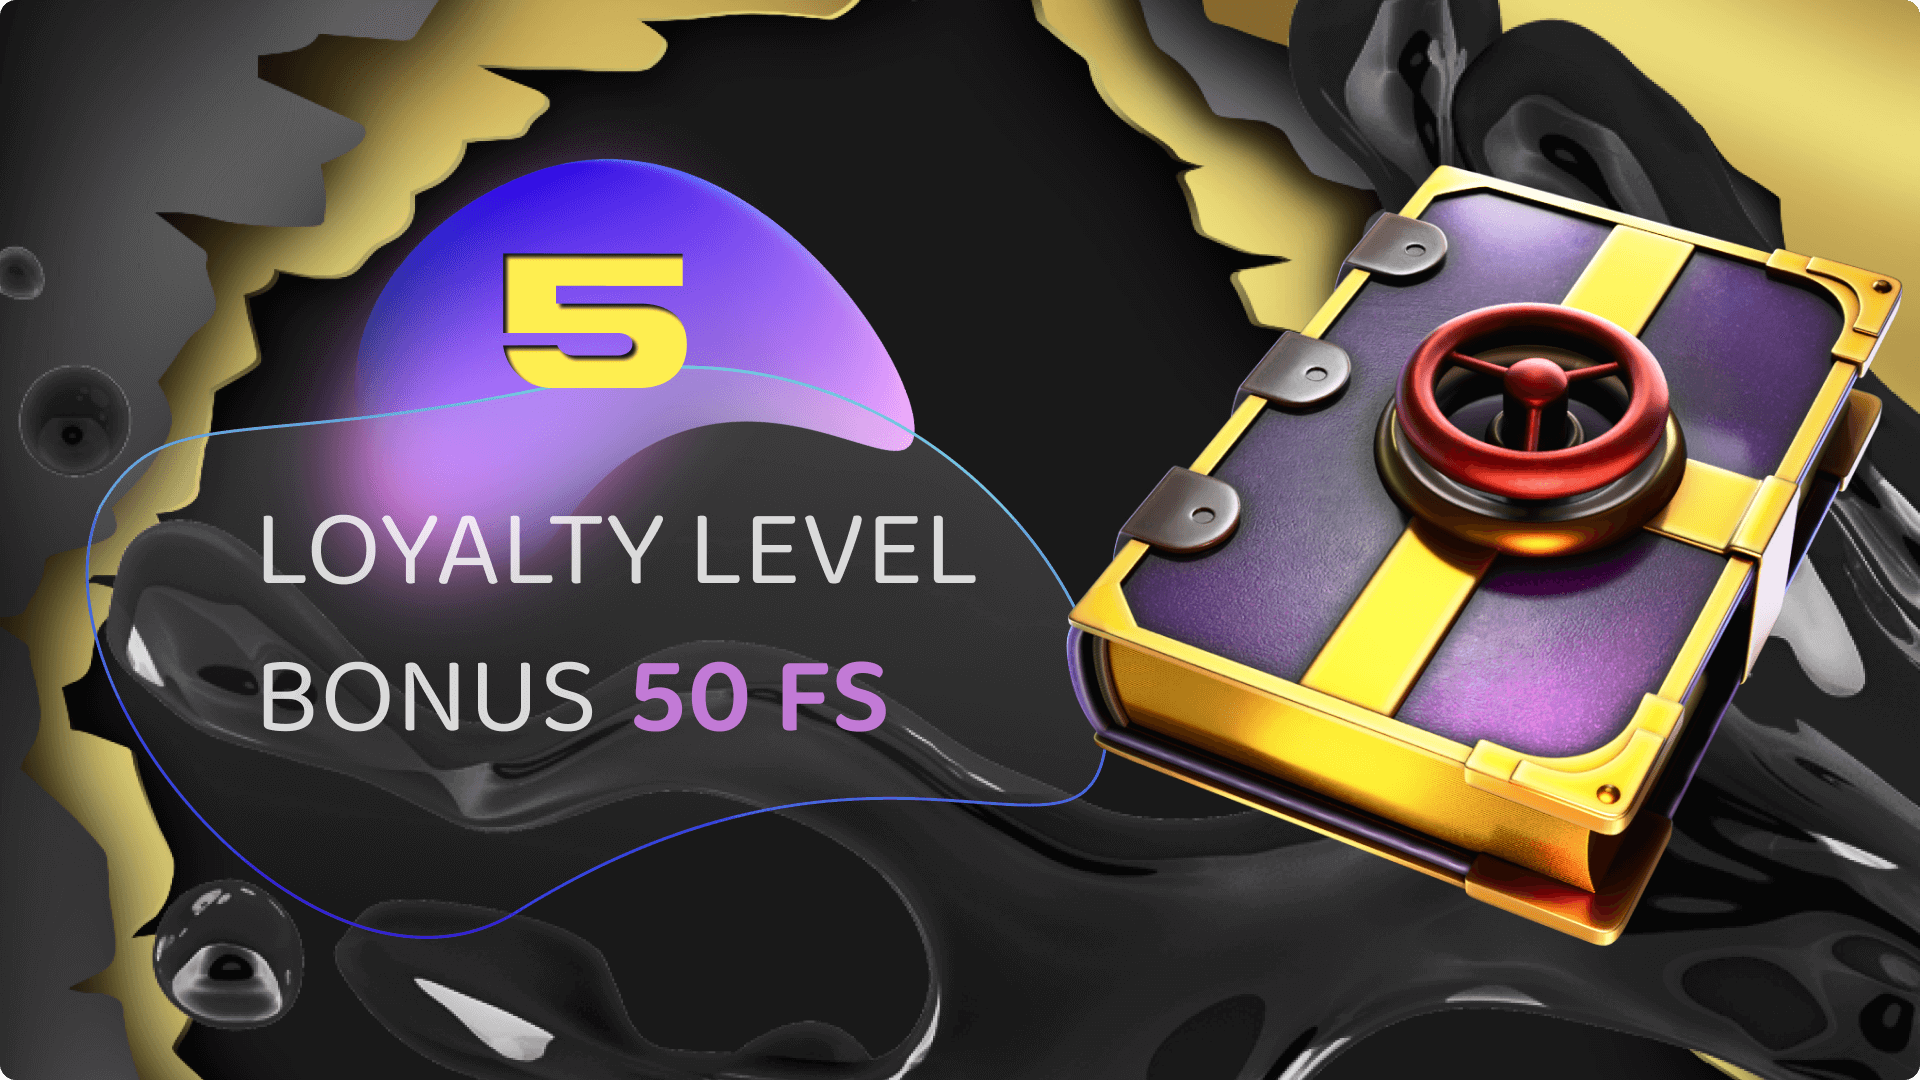 50 FS for 5 loyalty level